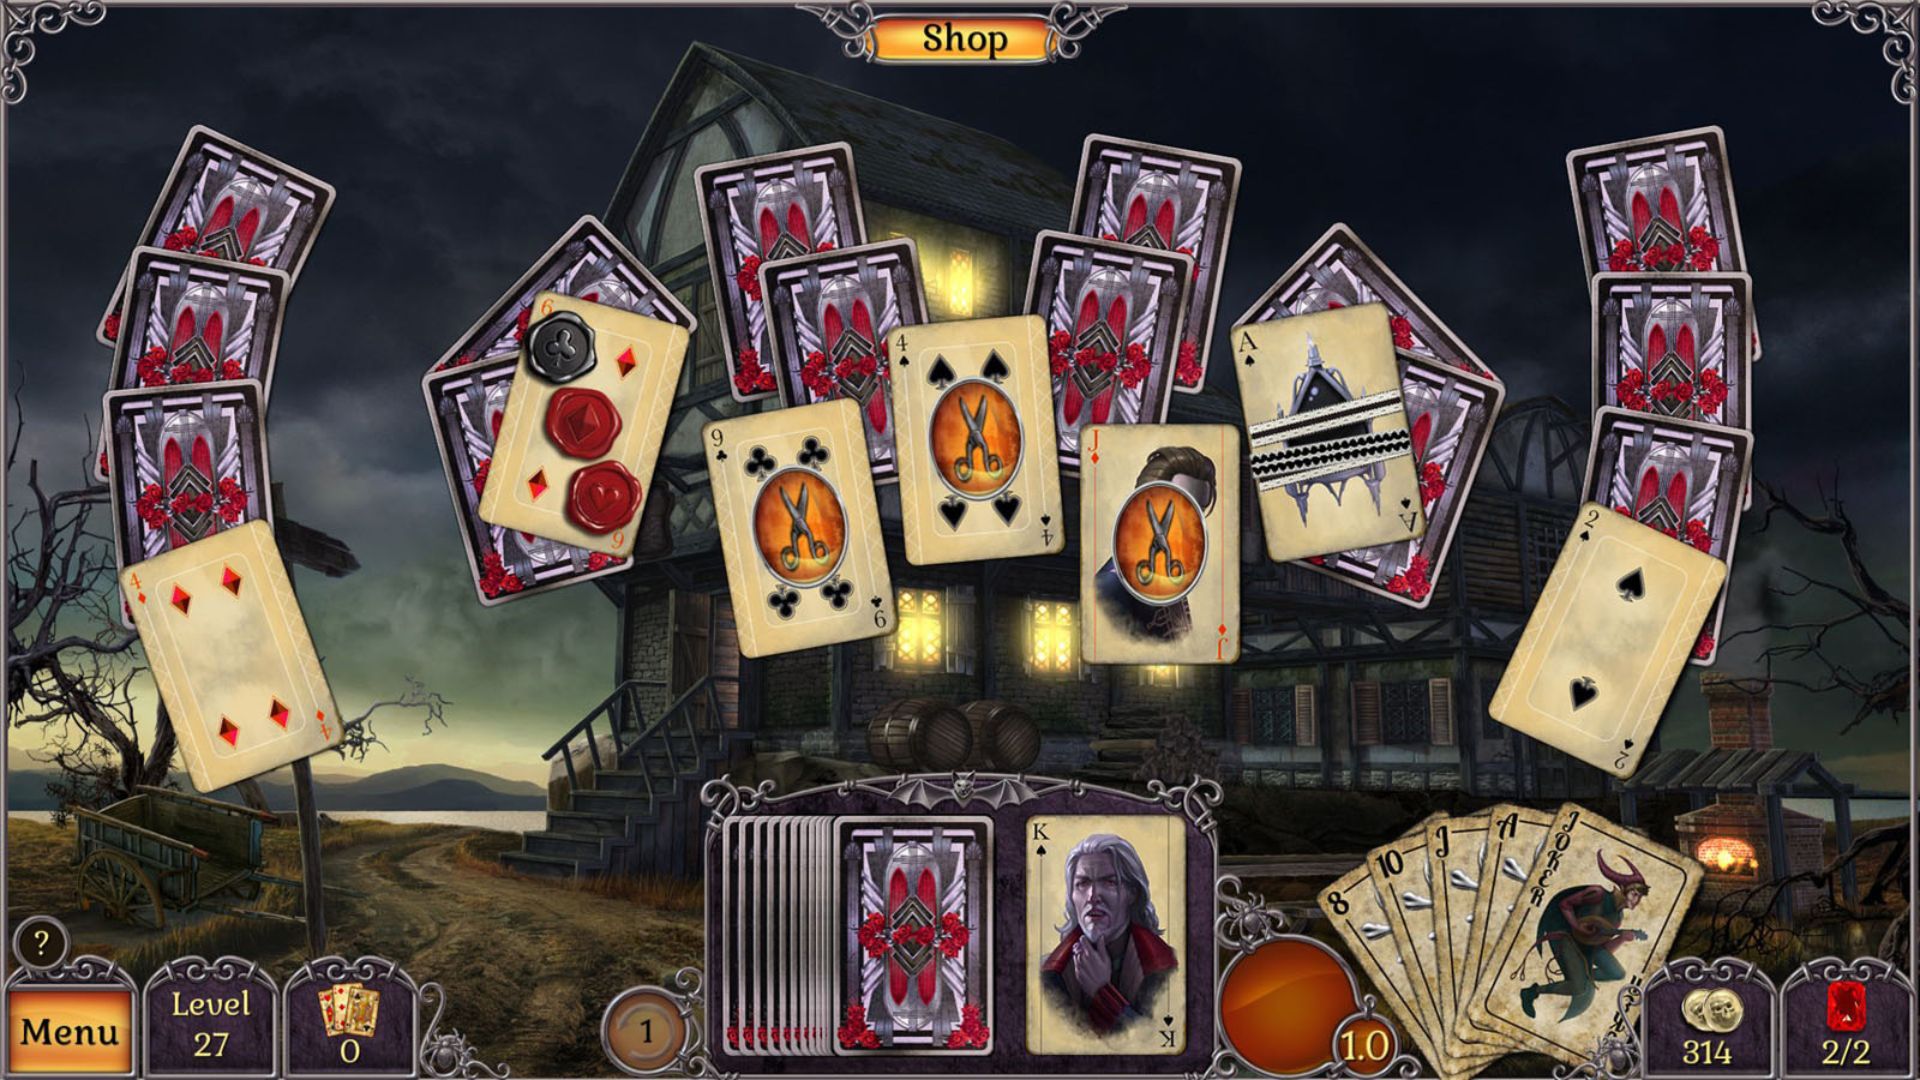 Download & Play Solitaire - Classic Card Games on PC with